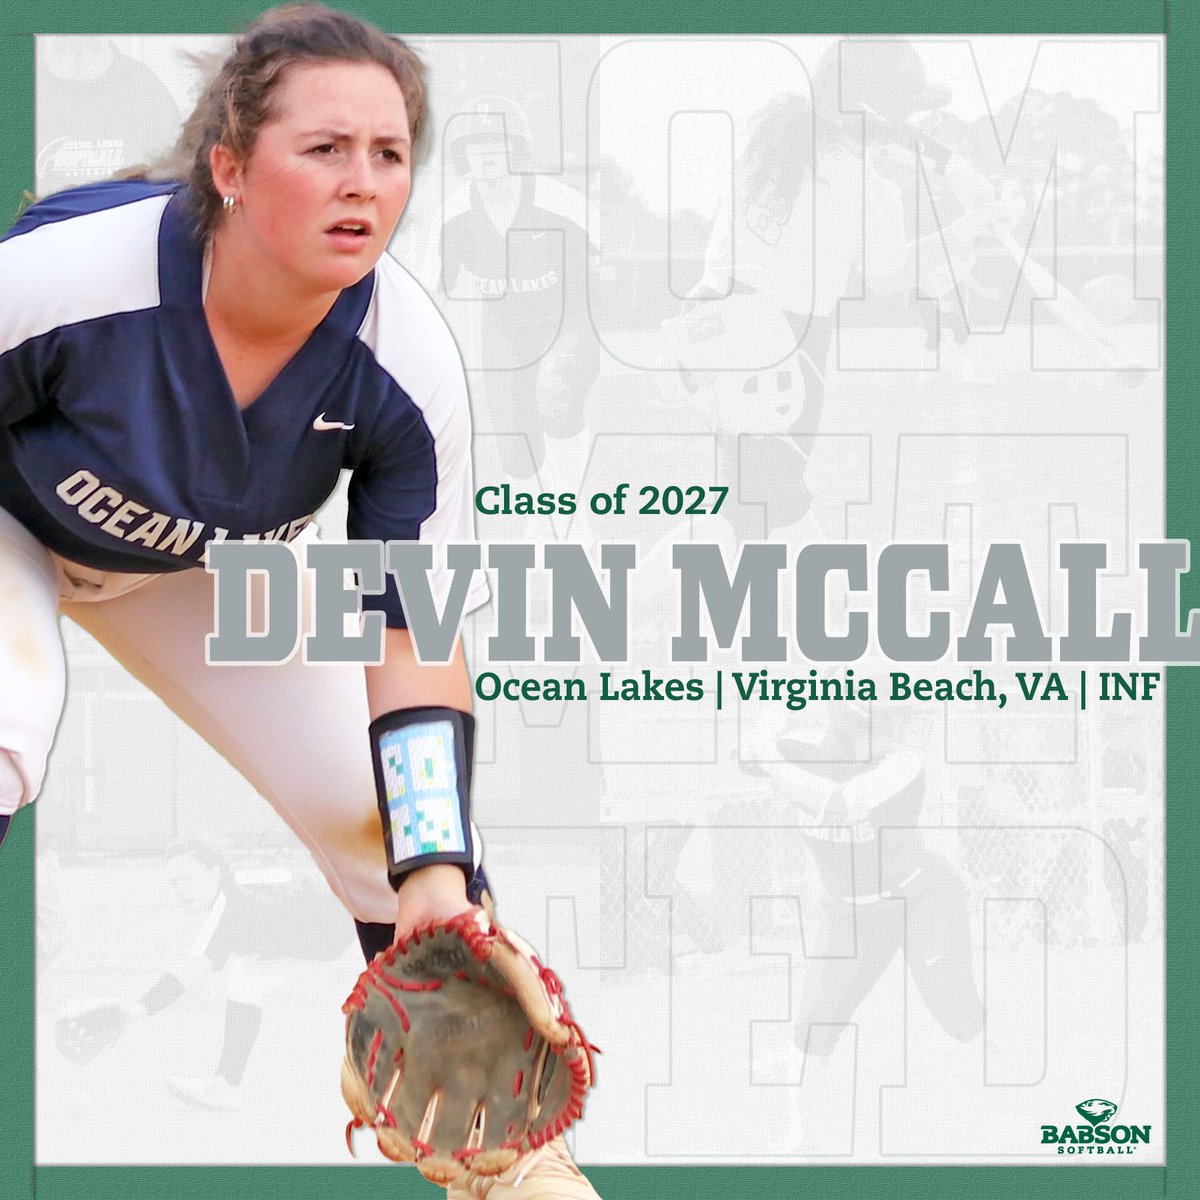 Devin McCall 🤝 Babson Softball

🦫 Devin McCall
📍 Virginia Beach, VA | Ocean Lakes
🥎 INF

Welcome to the family, Devin! 

#GoBabo #StrictlyBusiness #DefendTheDam